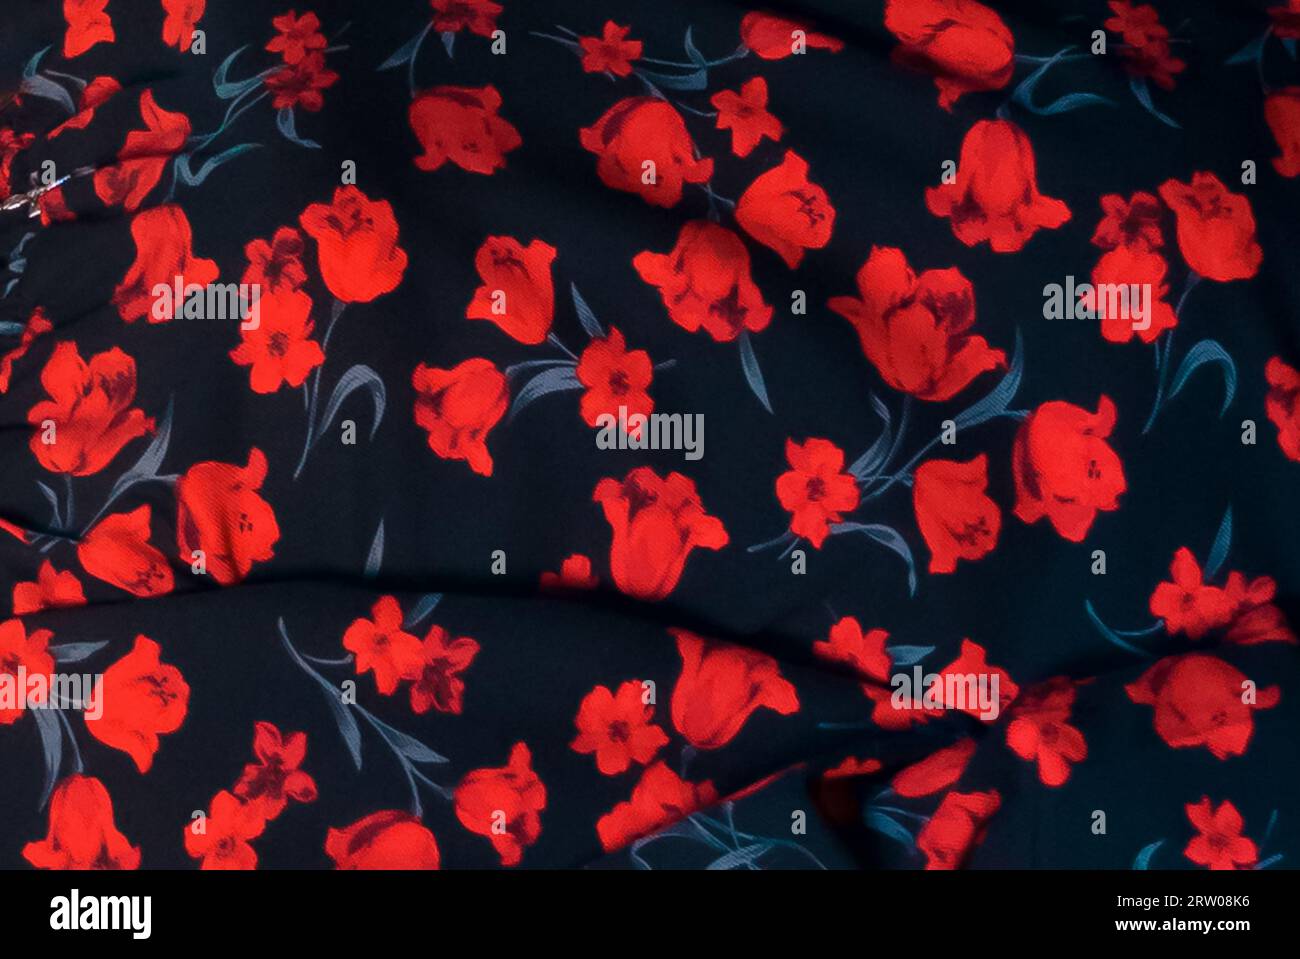 Abstract pattern of red flowers design background sample material soft focus. Stock Photo